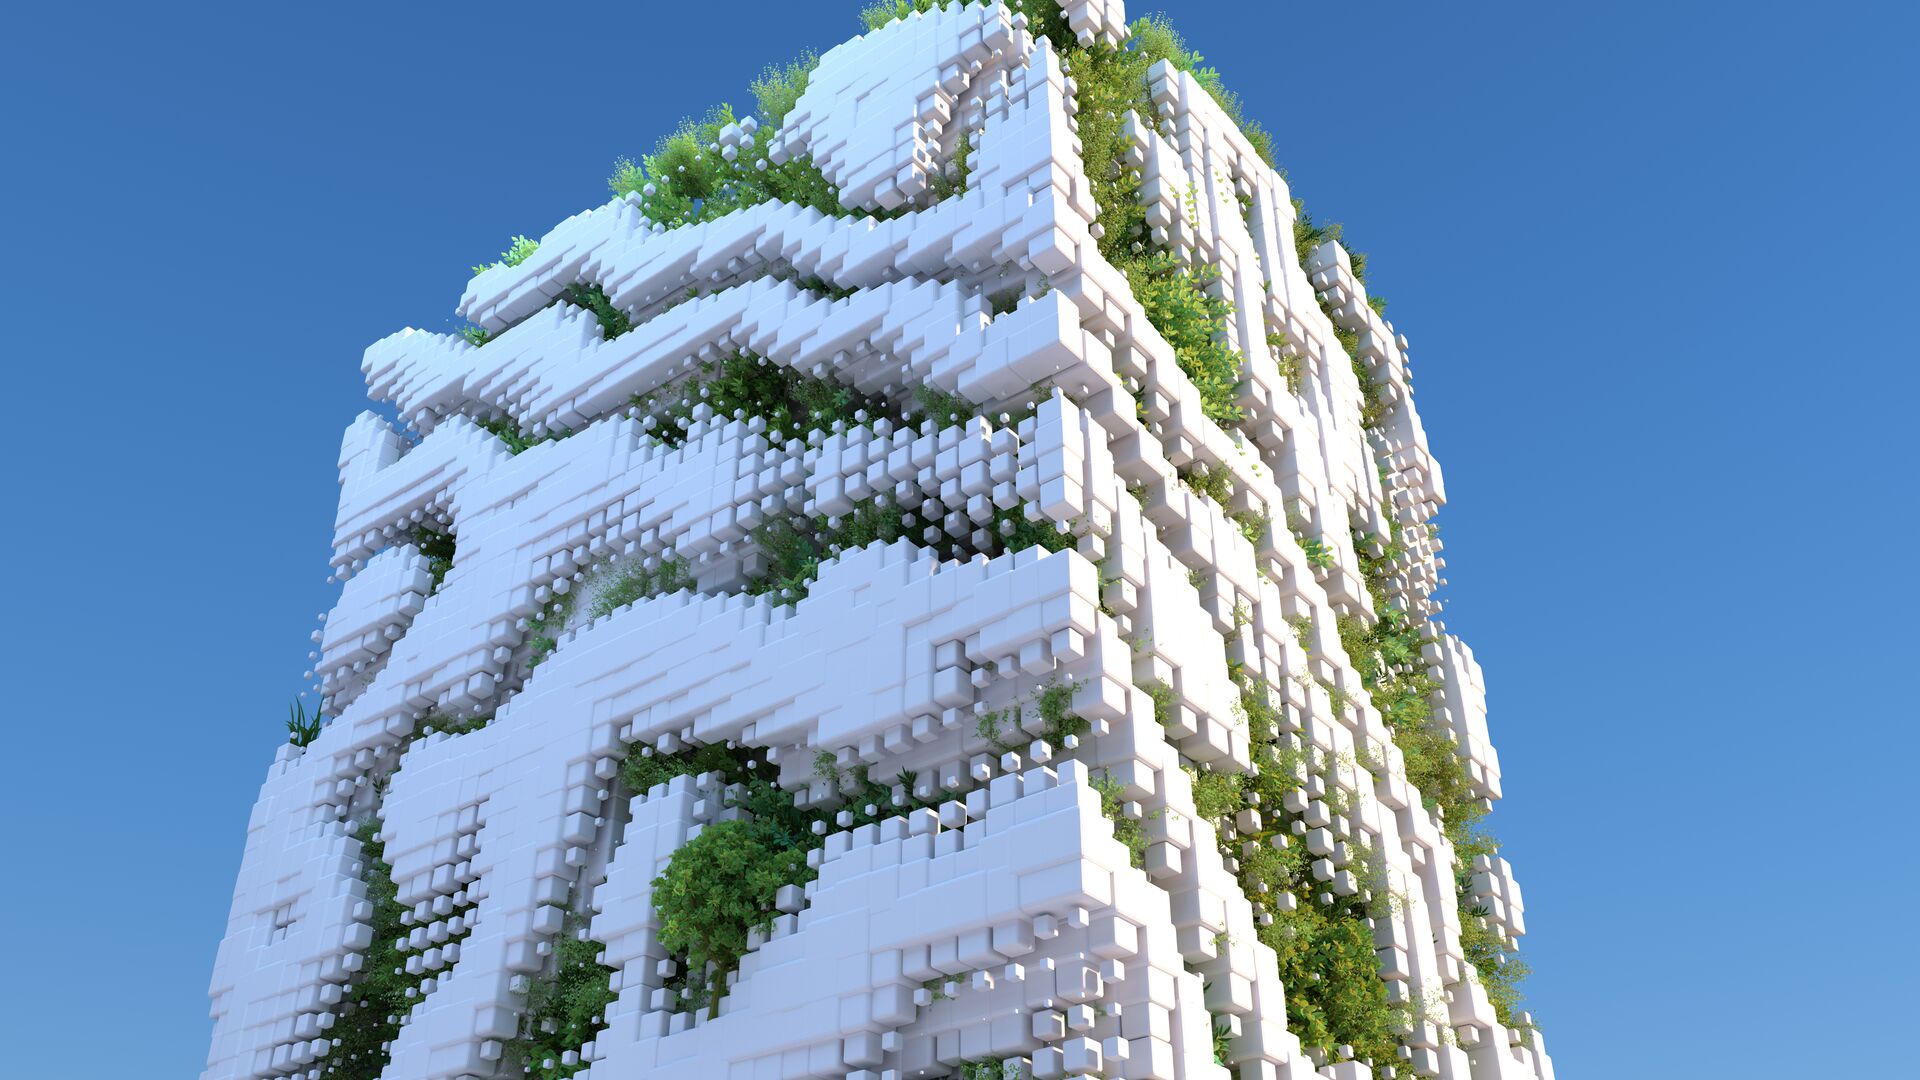 Concept for the intersection of digital assets and carbon credits as it is a geometric cube-like building with greenary all around representing sustainability and digital.